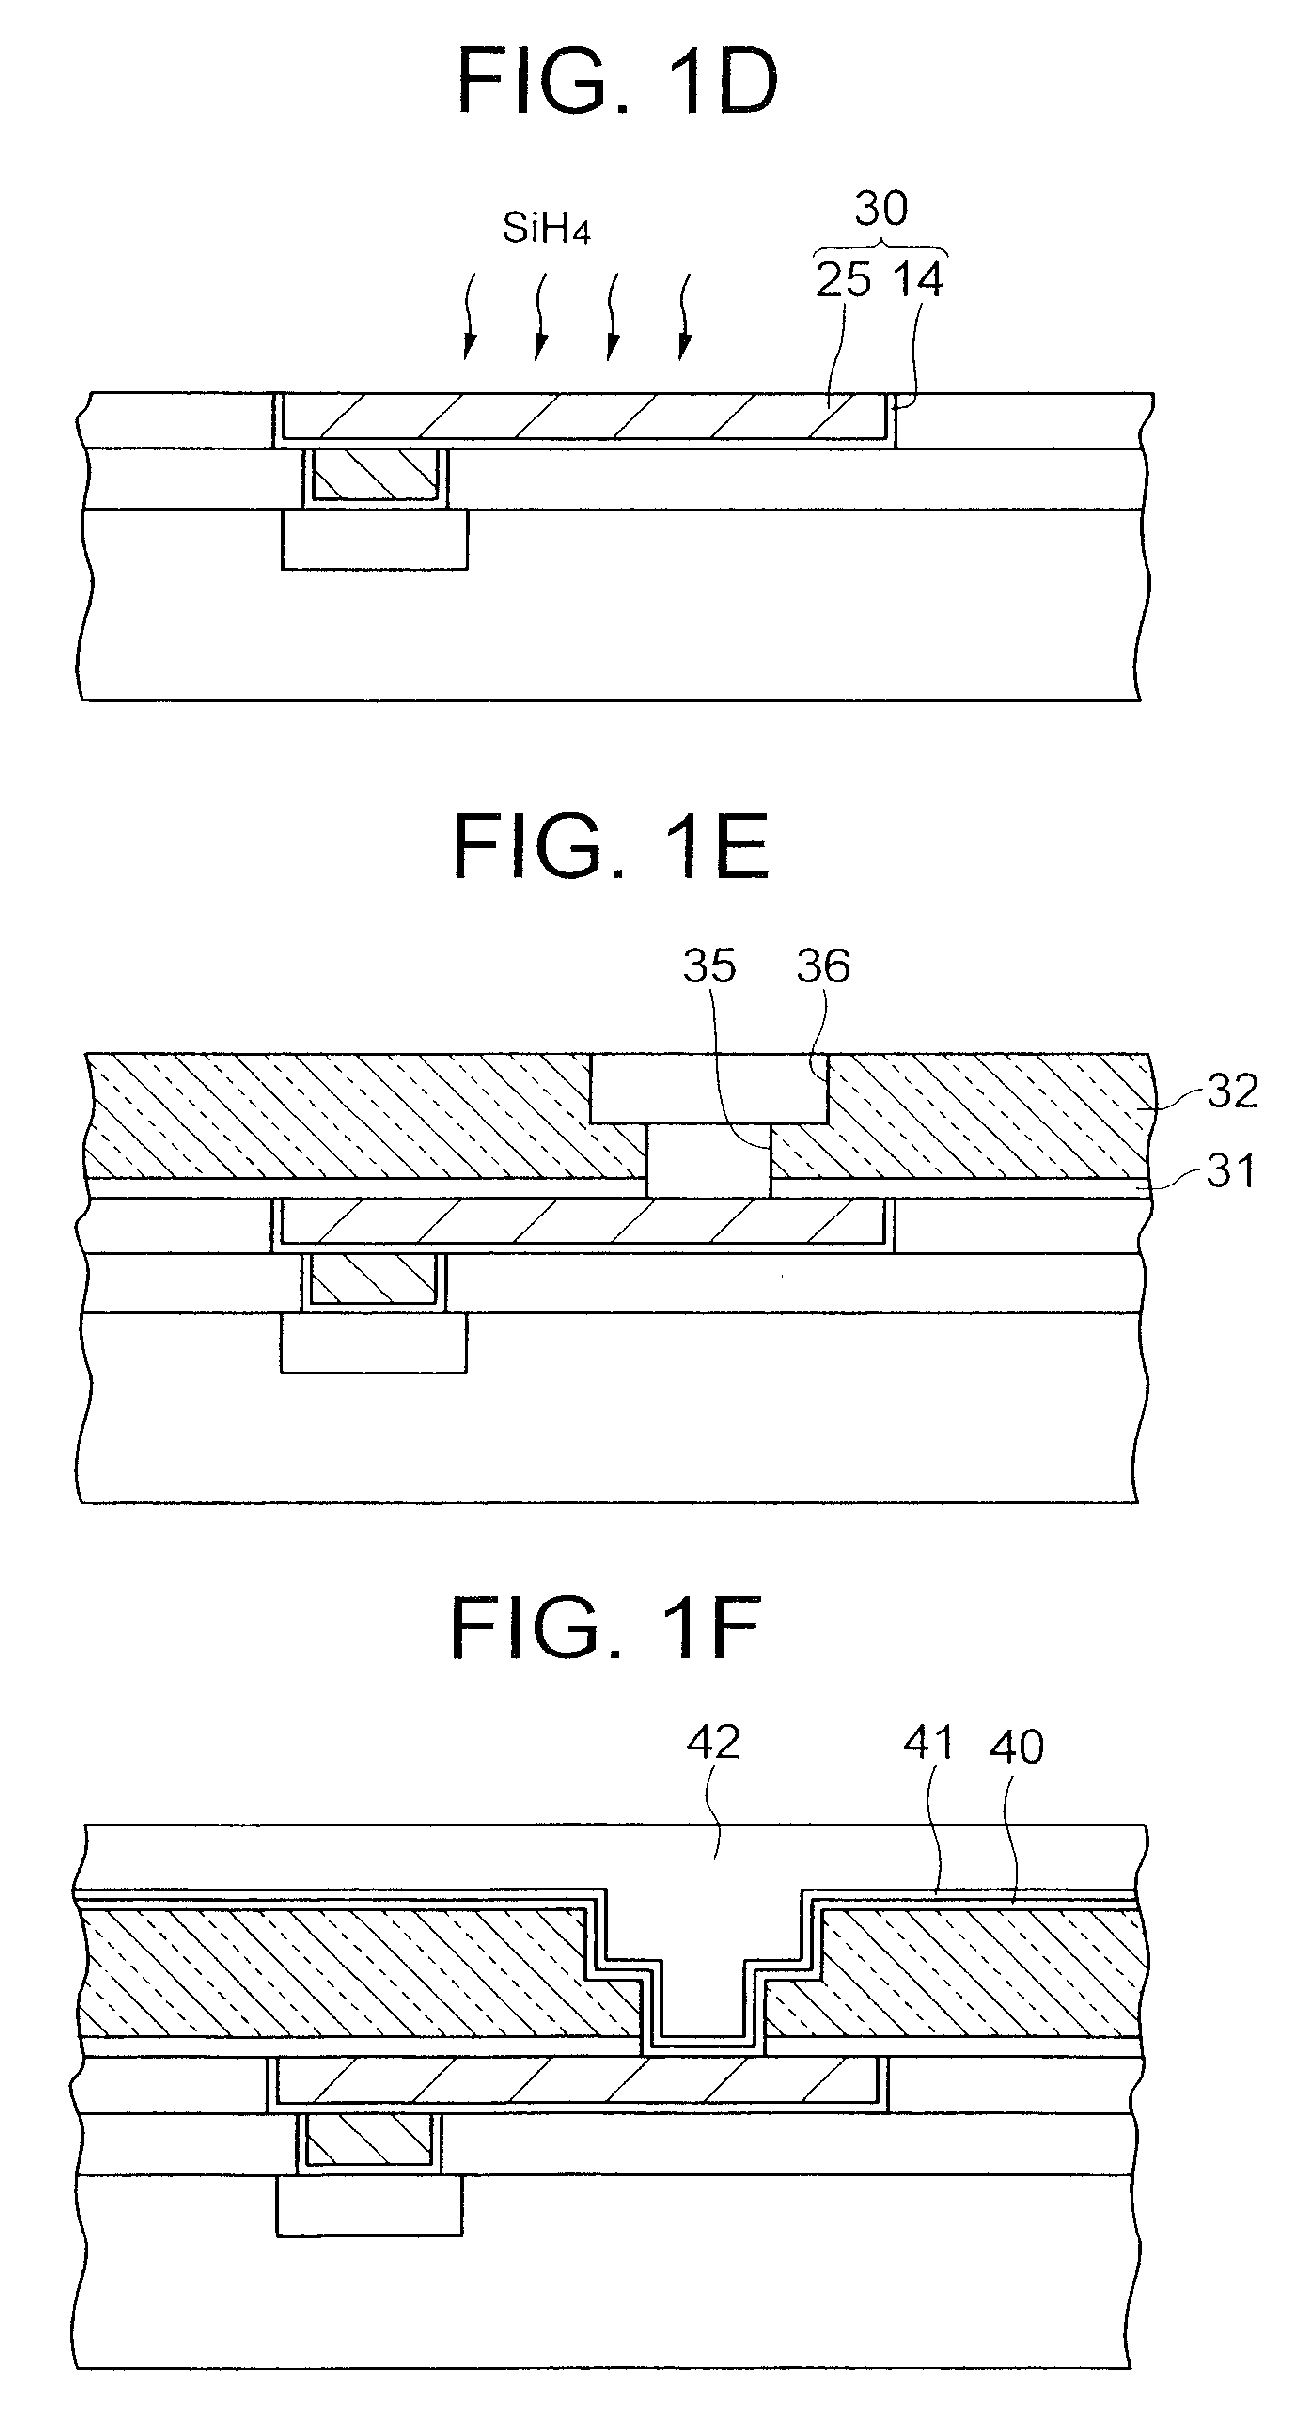 Semiconductor device having a cu interconnection